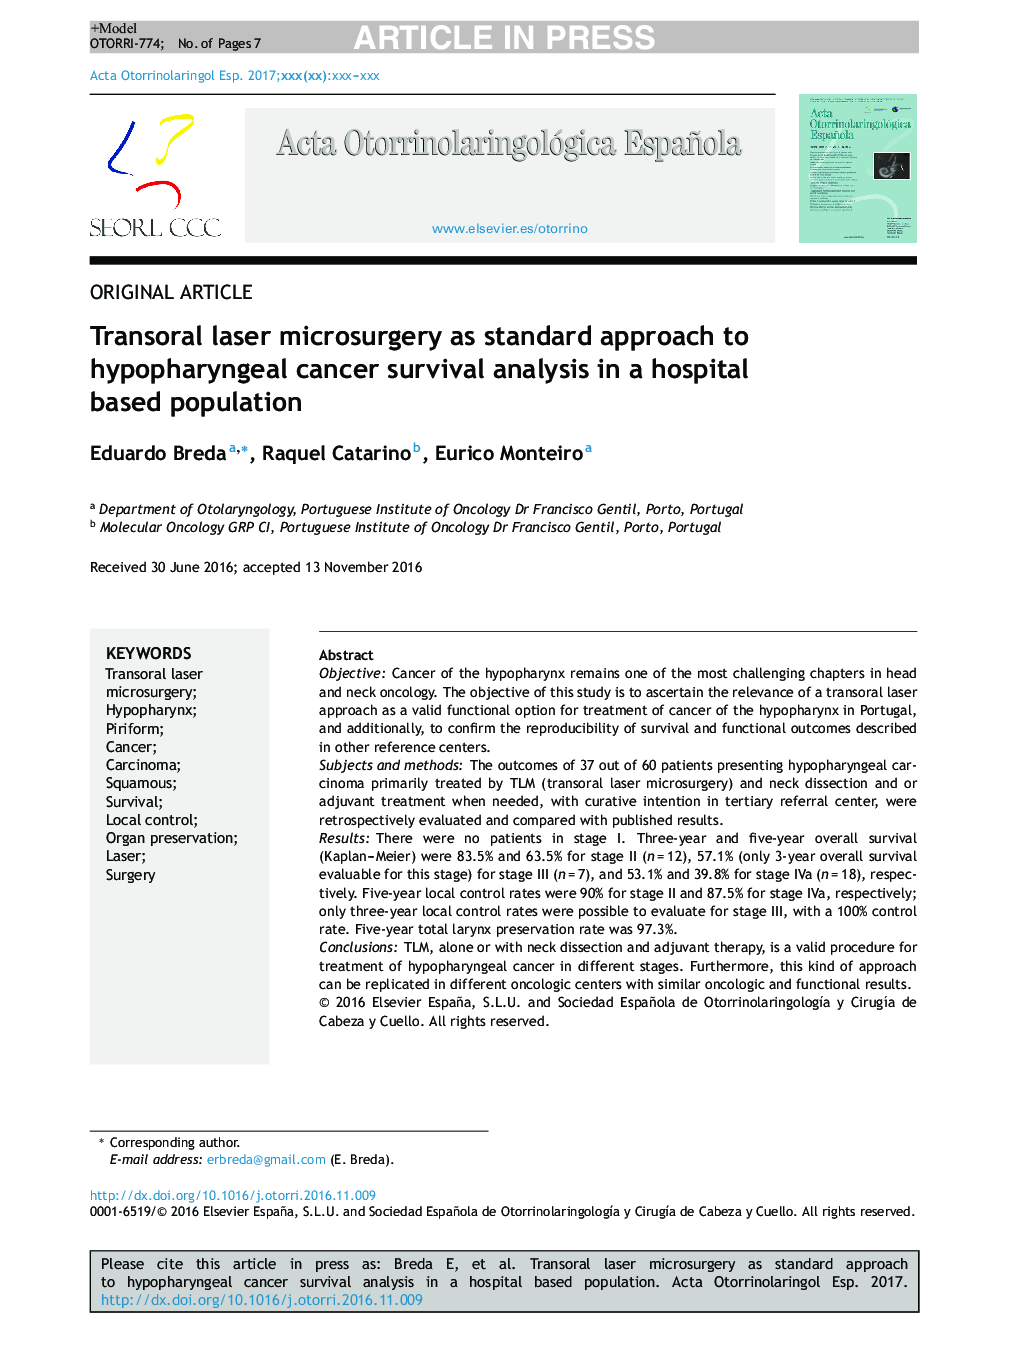 Transoral laser microsurgery as standard approach to hypopharyngeal cancer. Survival analysis in a hospital based population